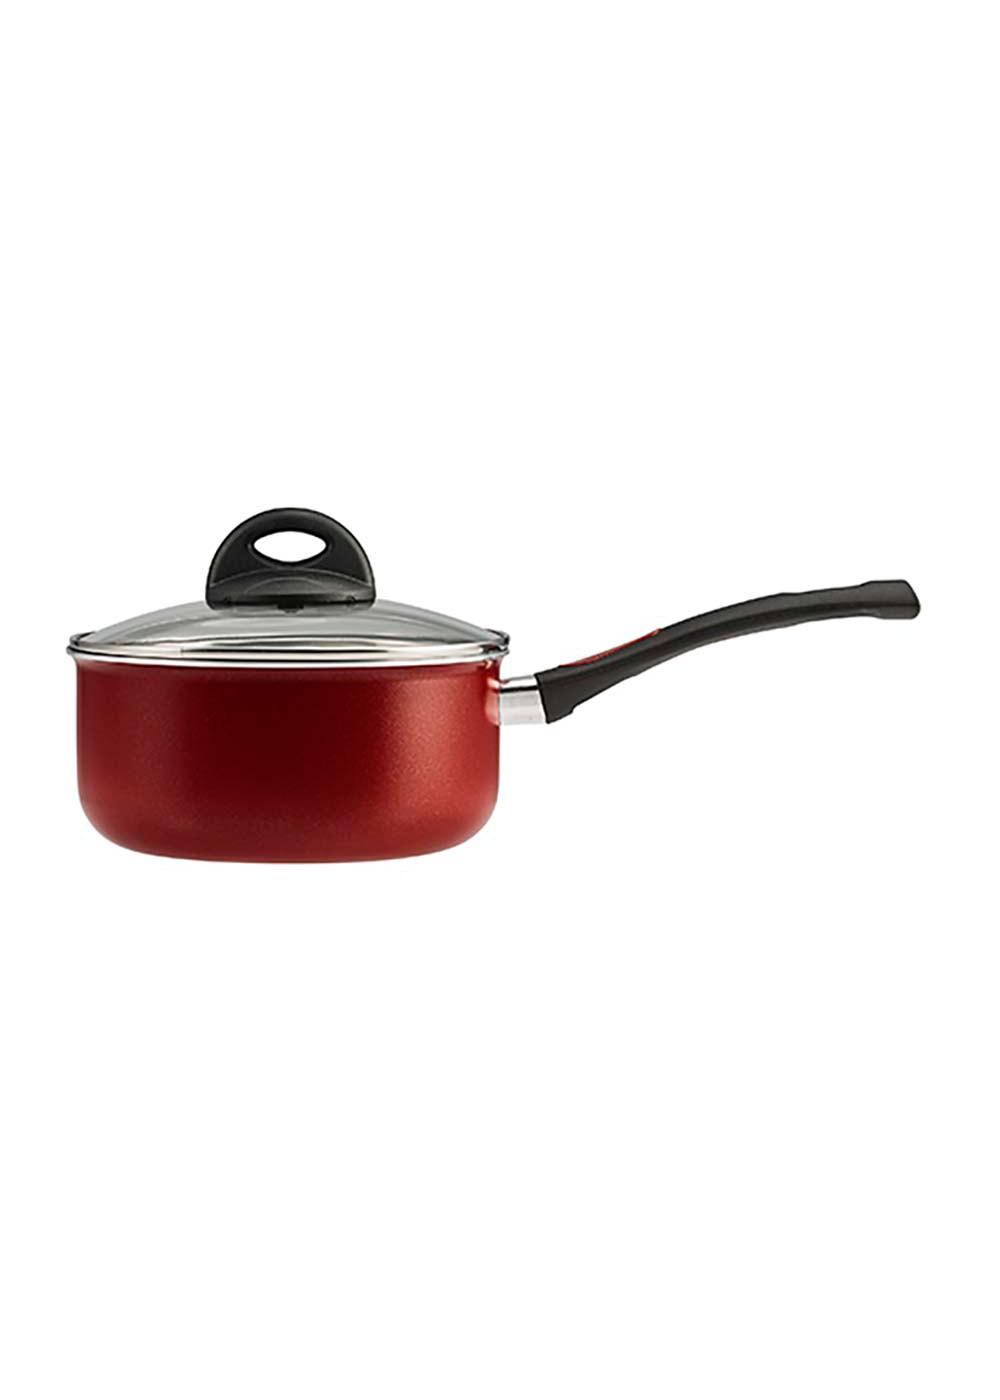 Tramontina Non-Stick Red Cookware Set; image 8 of 14